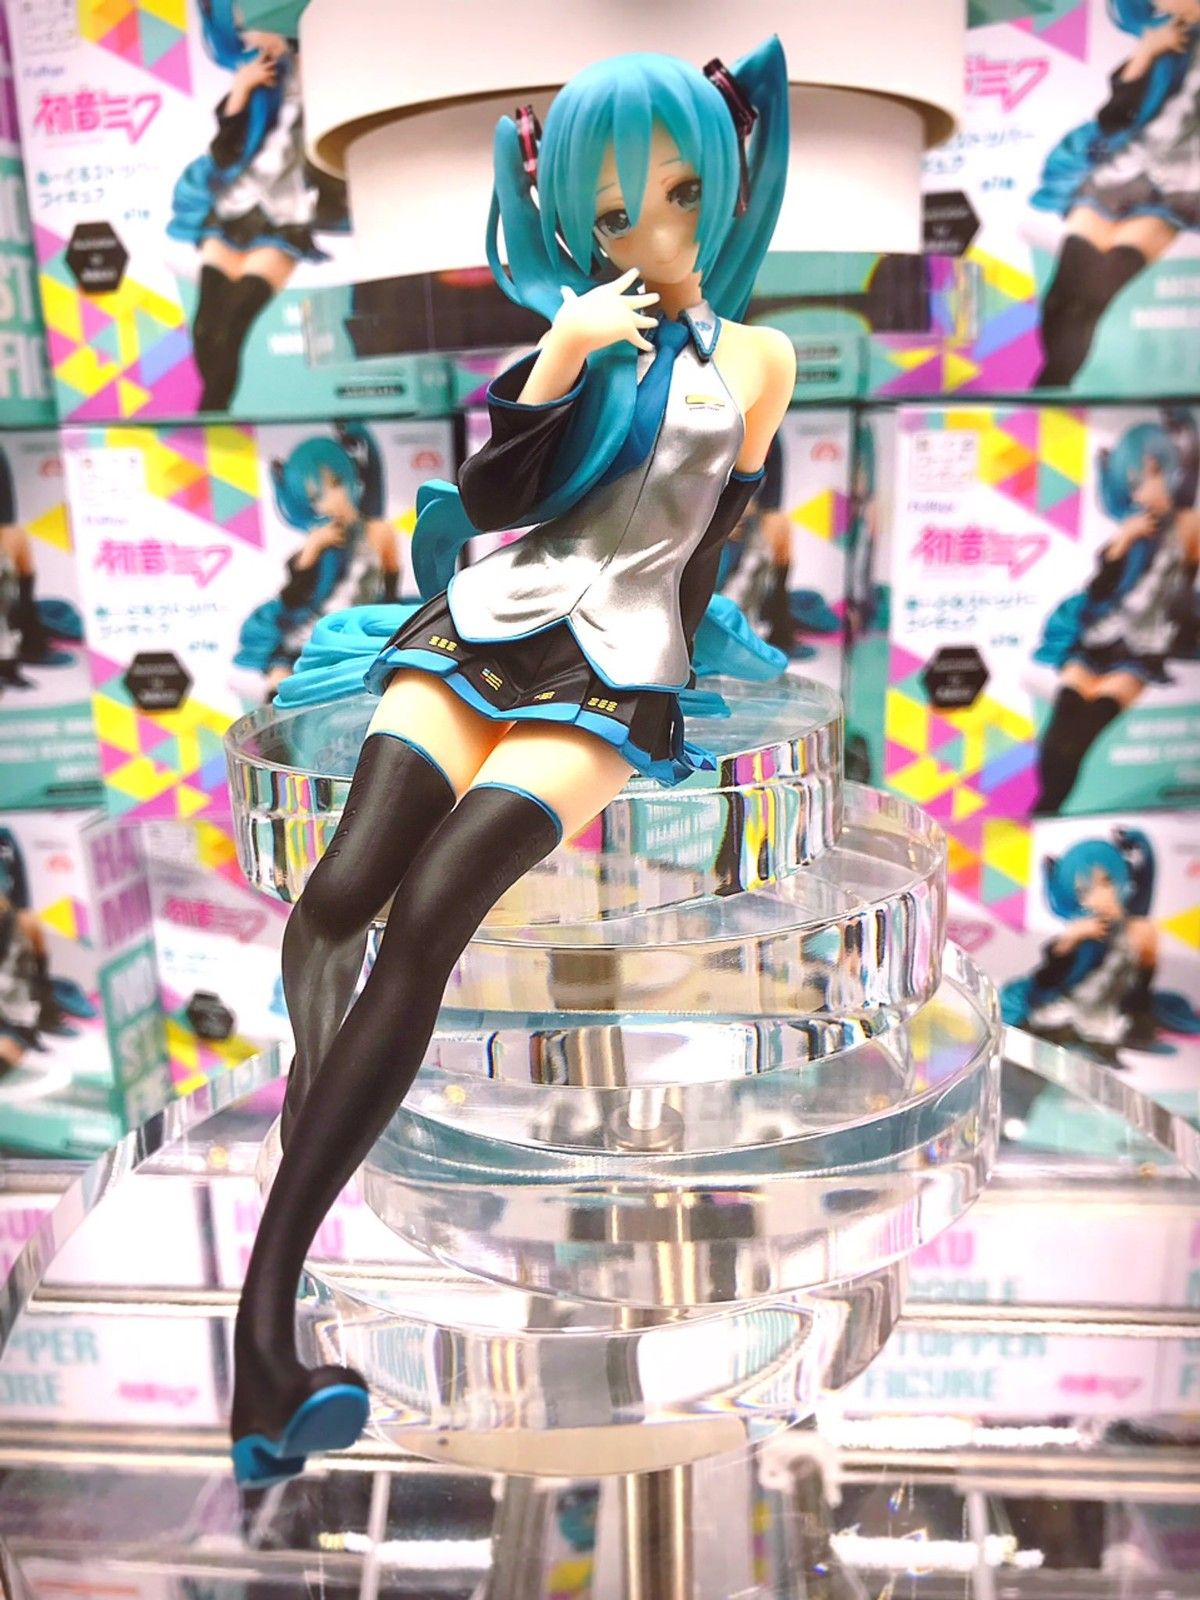 [Hatsune Miku] Nuyoru Stopper Figure, too much color and become a topic erotic 9